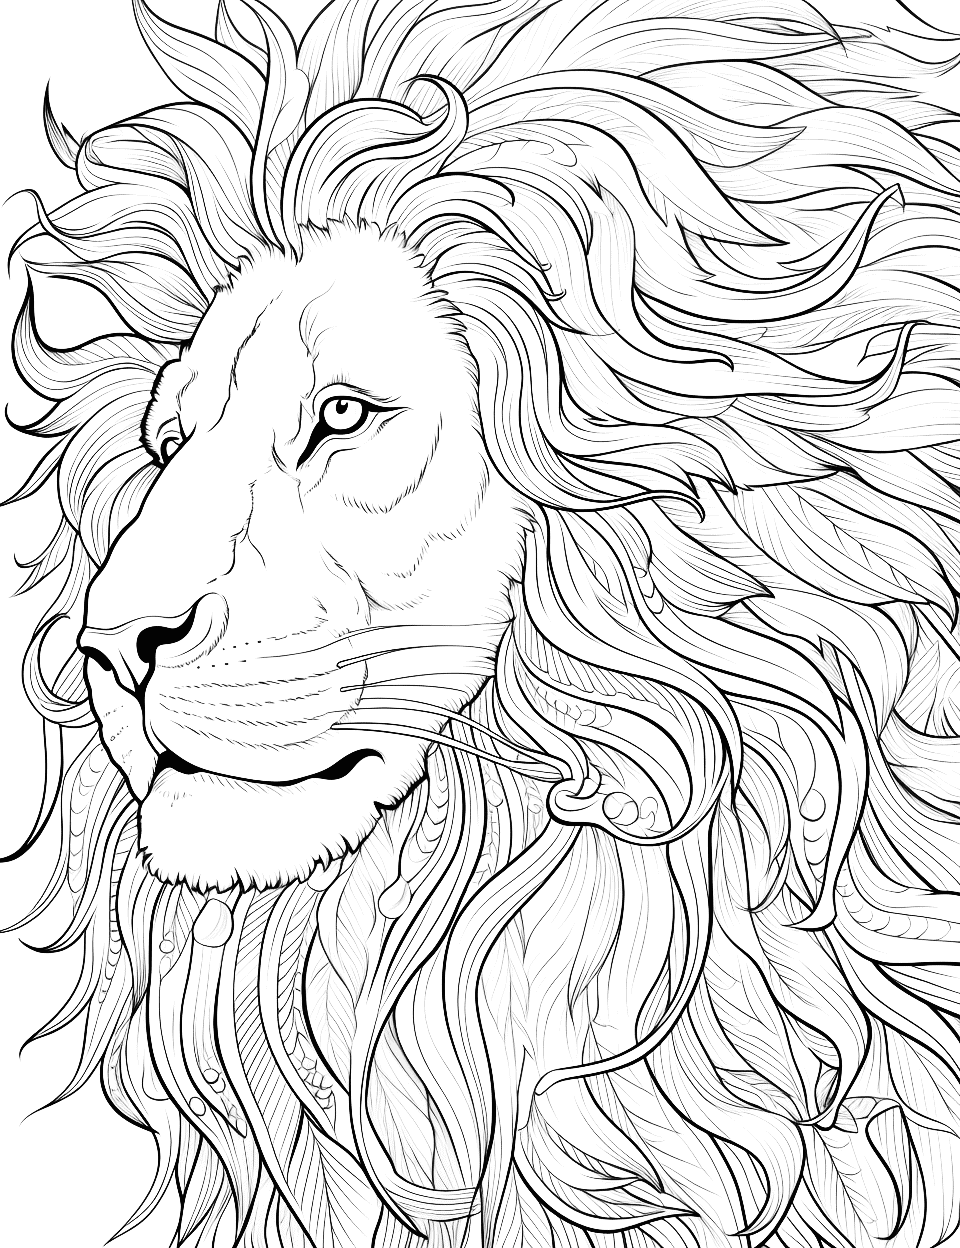 Lion's Majestic Mane Adult Coloring Page - Close-up of a lion’s mane, full of texture and depth.